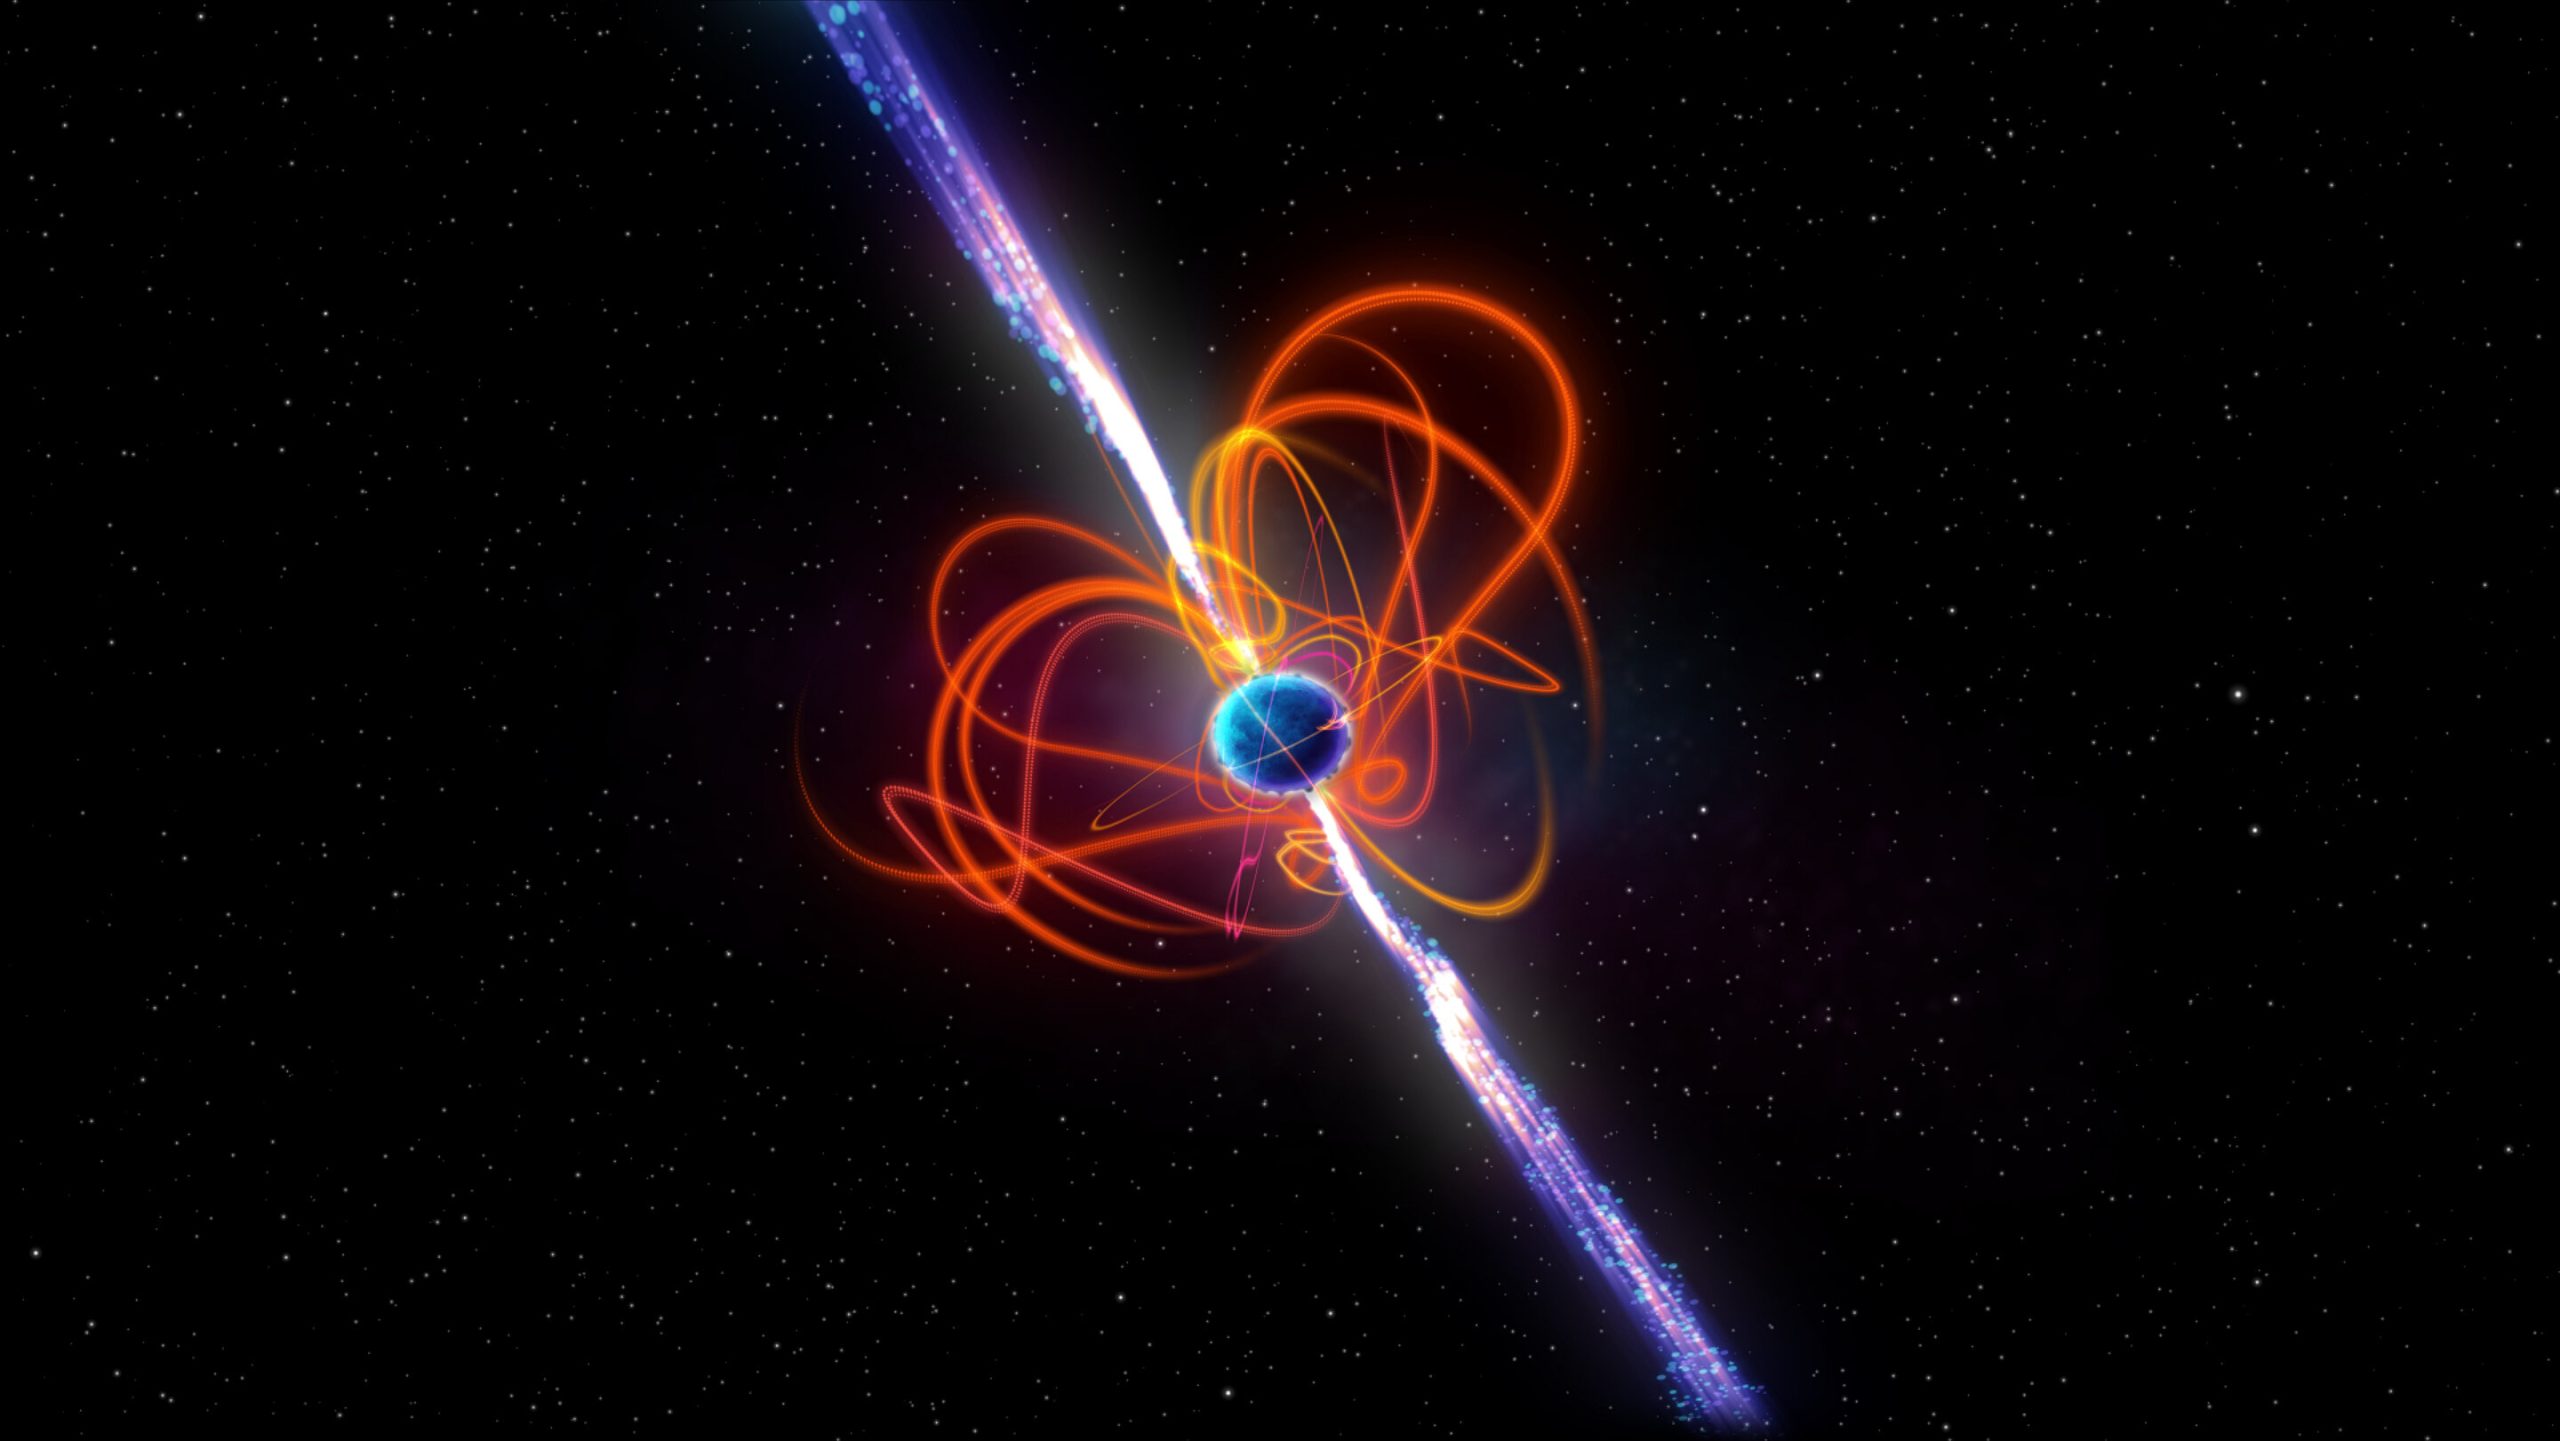 Astronomers find new stellar object that challenges neutron star physics: Credit: ICRAR.